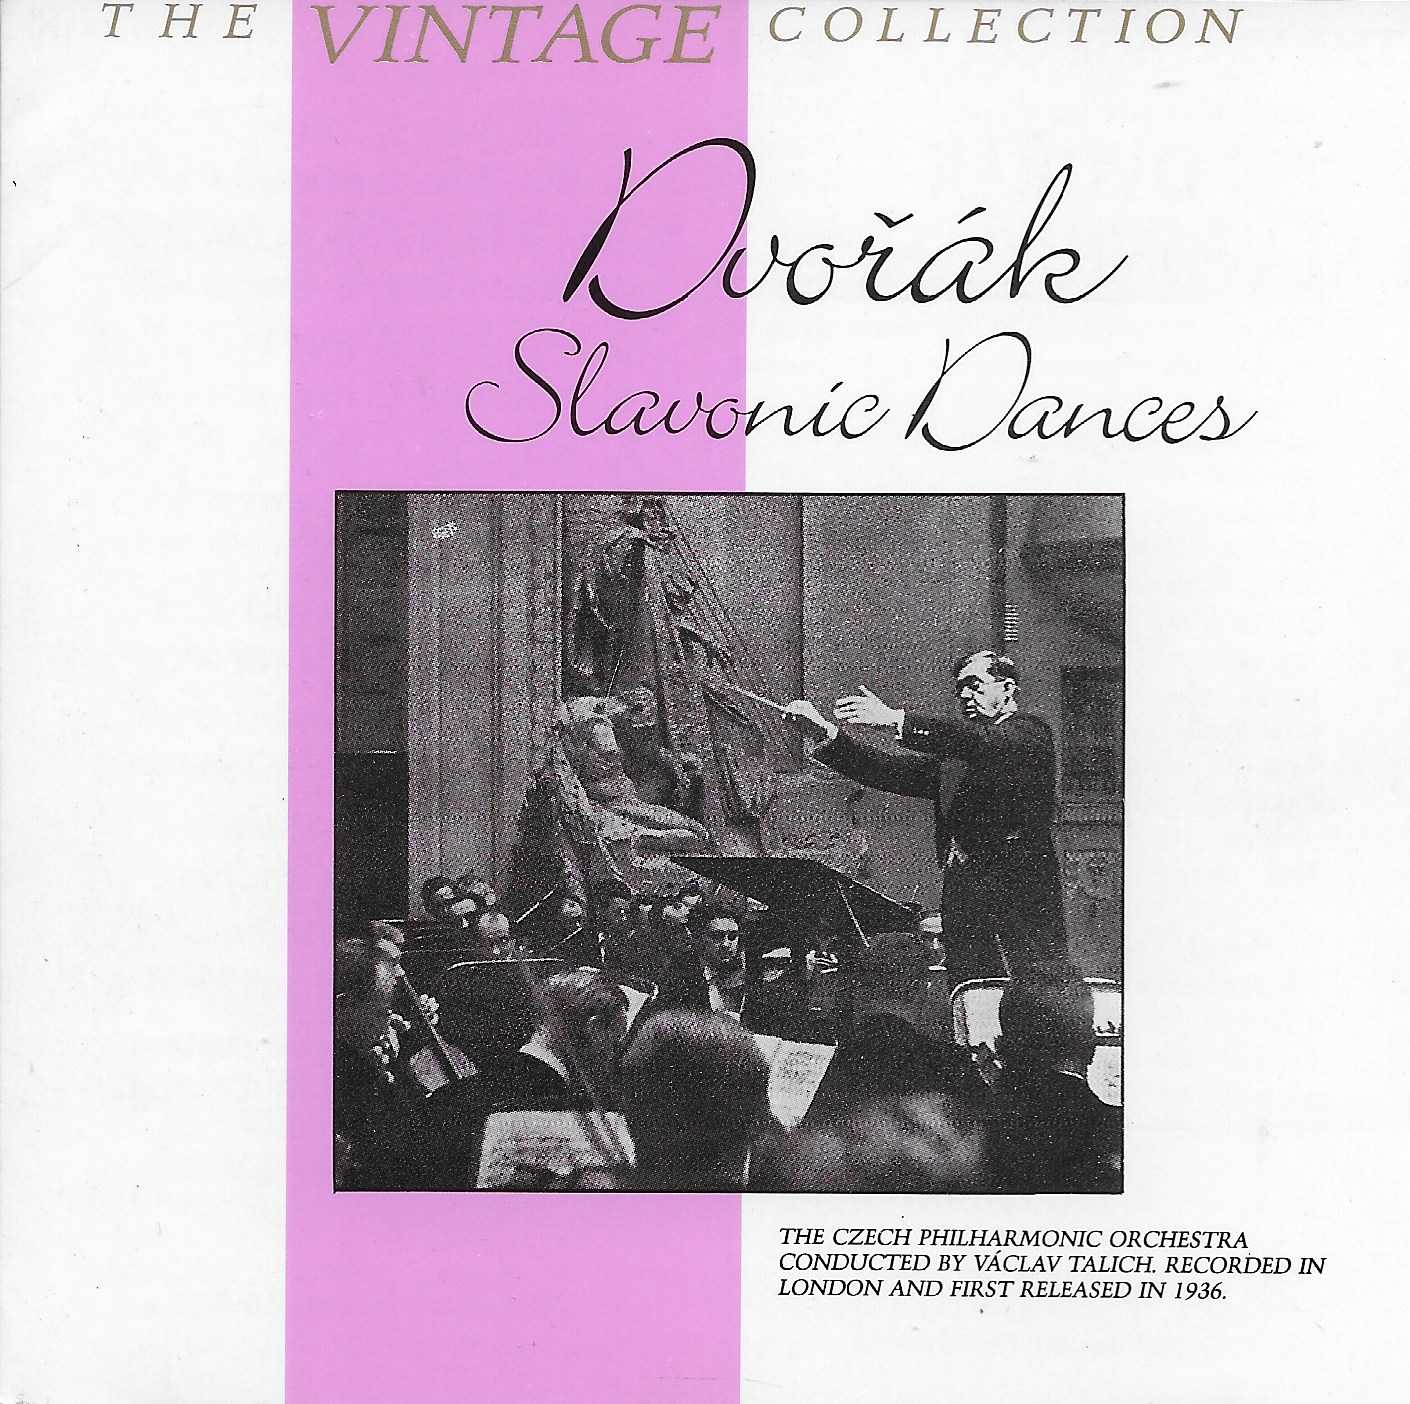 Picture of The vintage collection - Dvorak Slavonic dances by artist Dvorak from the BBC cds - Records and Tapes library